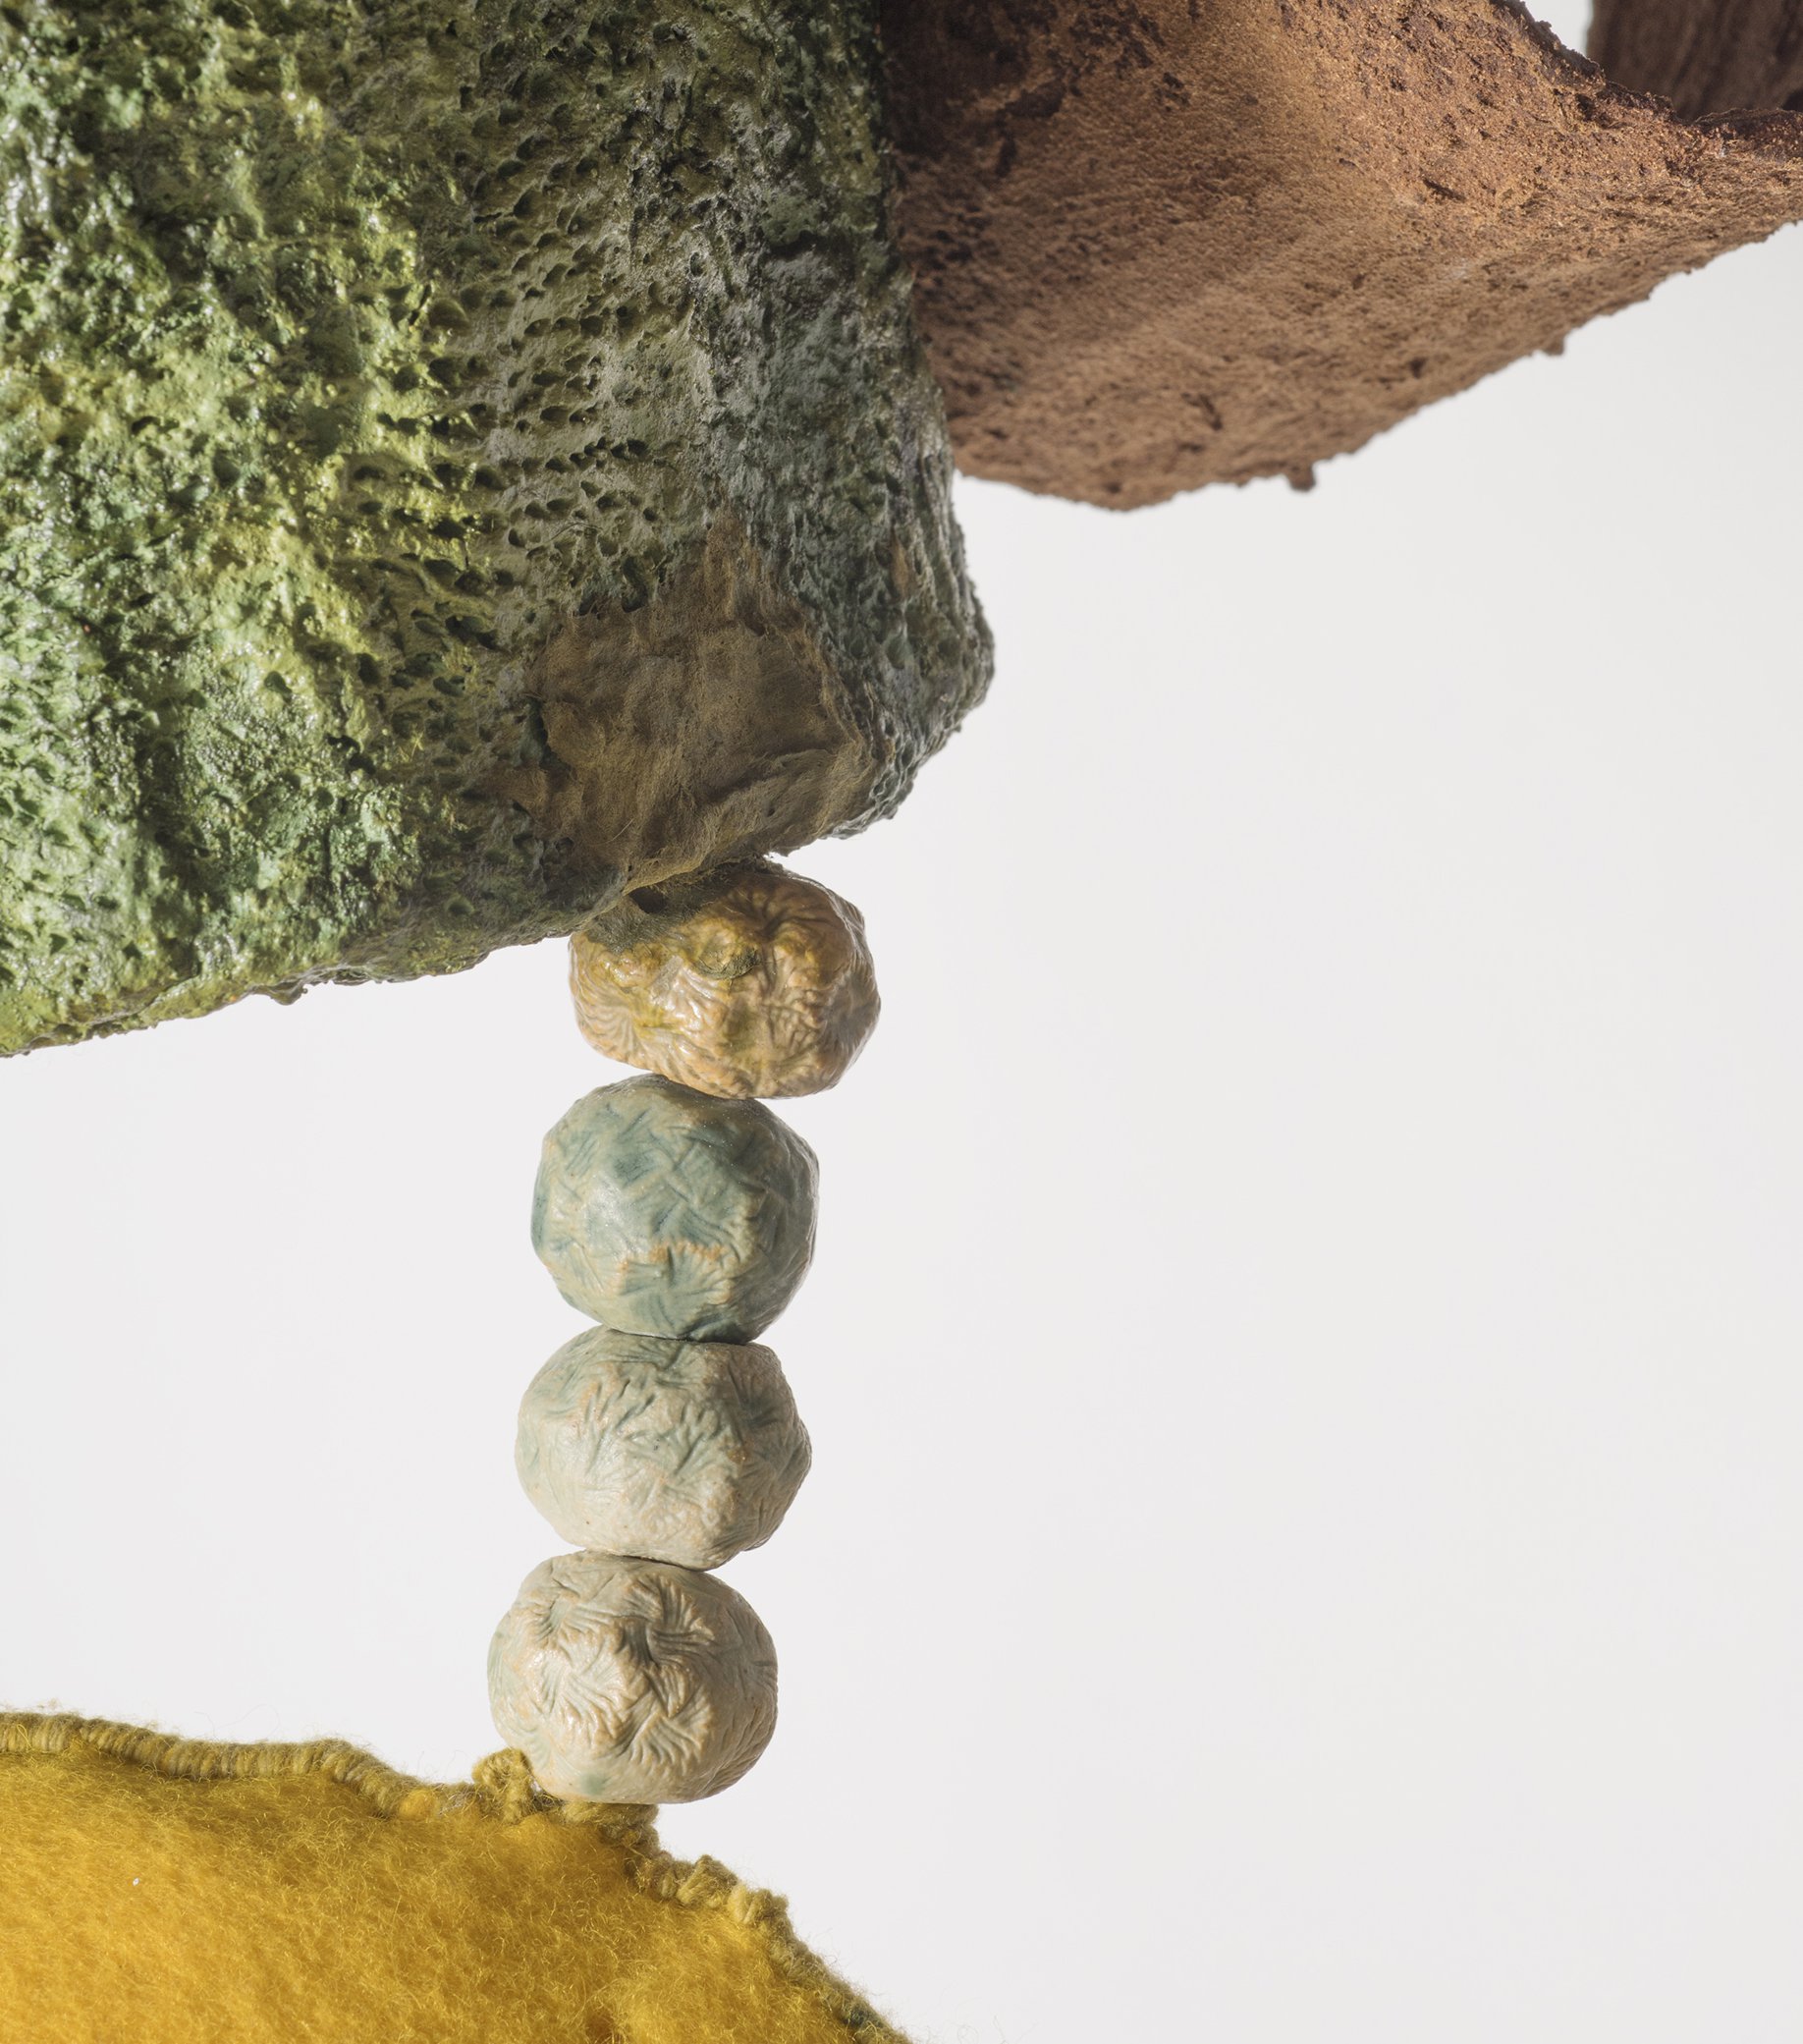 Tamara Henderson, The Canberran Characters, detail, produced in collaboration with Nell Pearson, various material, dimensions variable, 2020-2021